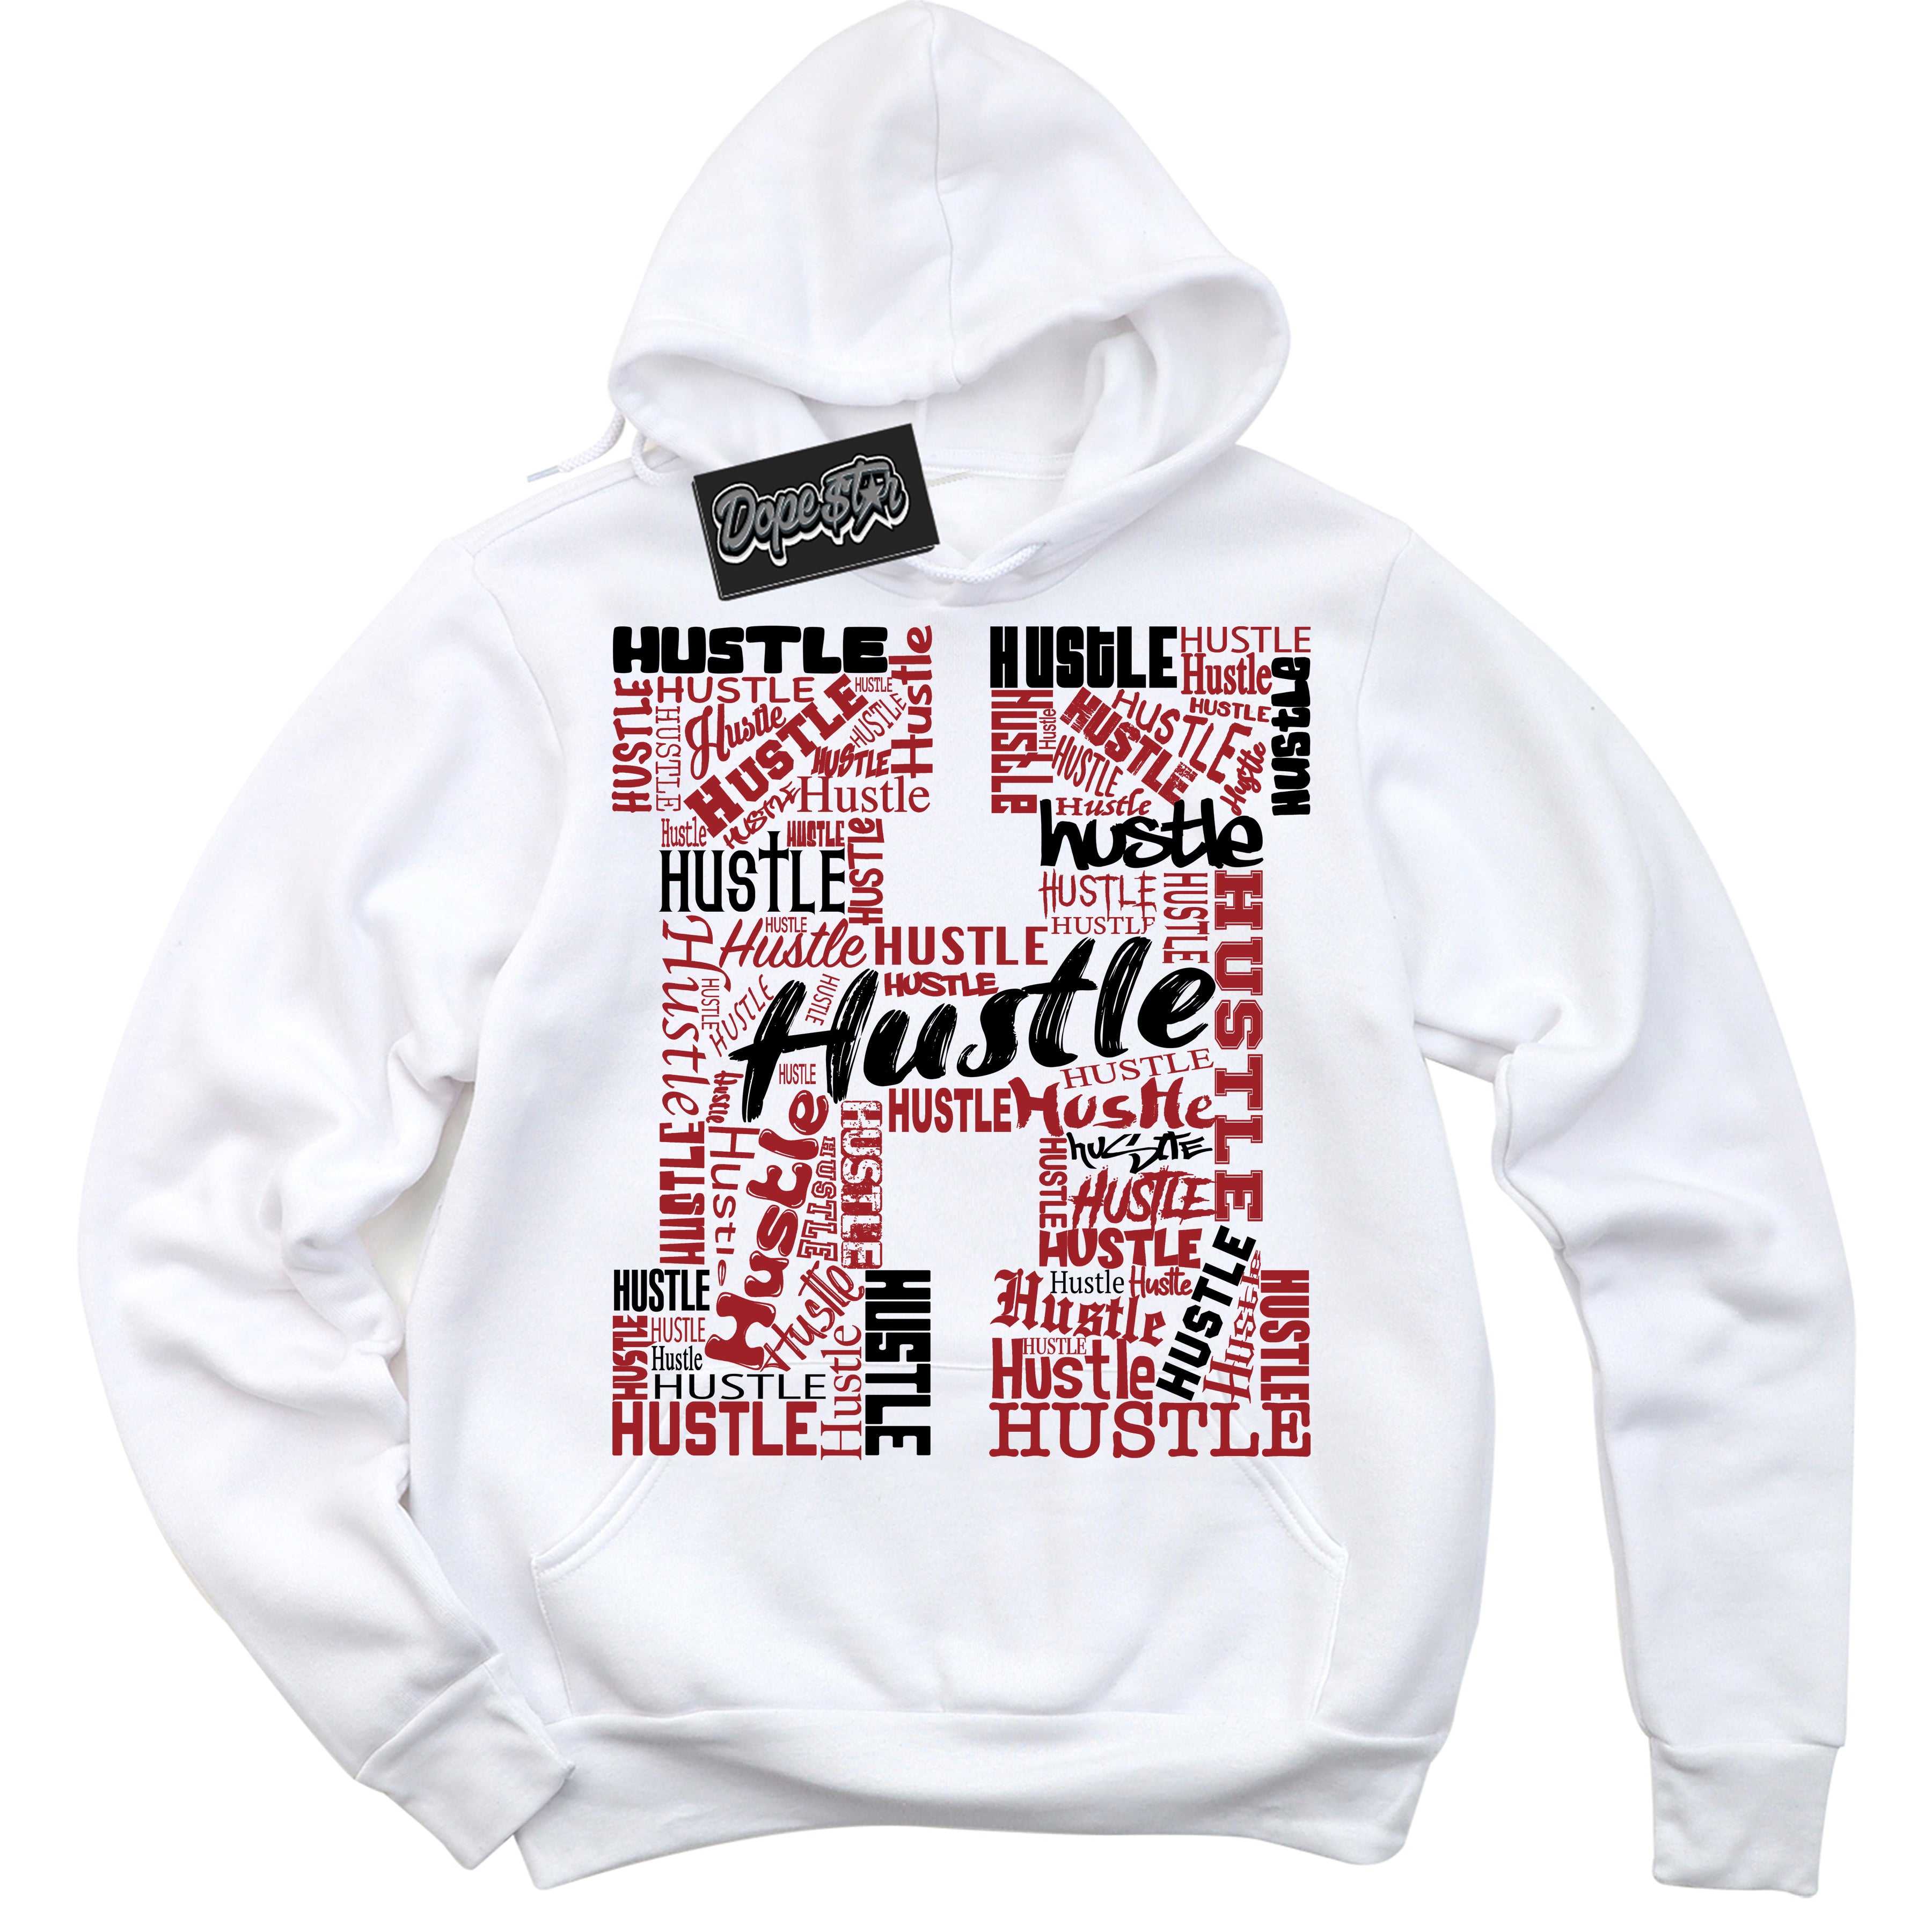 Cool White Hoodie With “ Hustle H “  Design That Perfectly Matches Lost And Found 1s Sneakers.